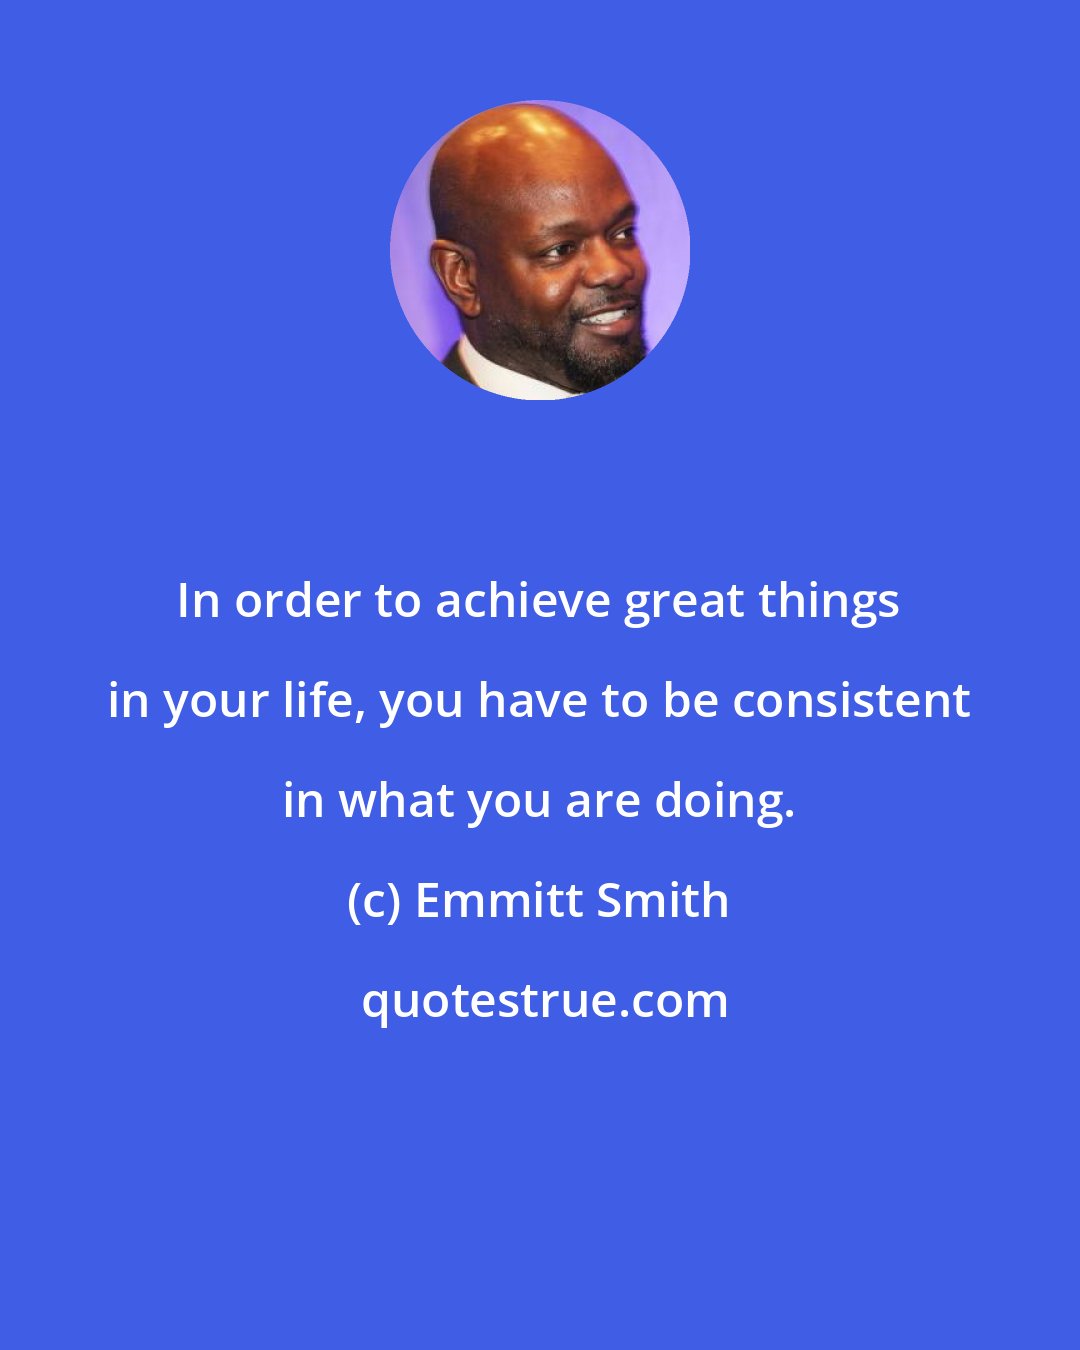 Emmitt Smith: In order to achieve great things in your life, you have to be consistent in what you are doing.